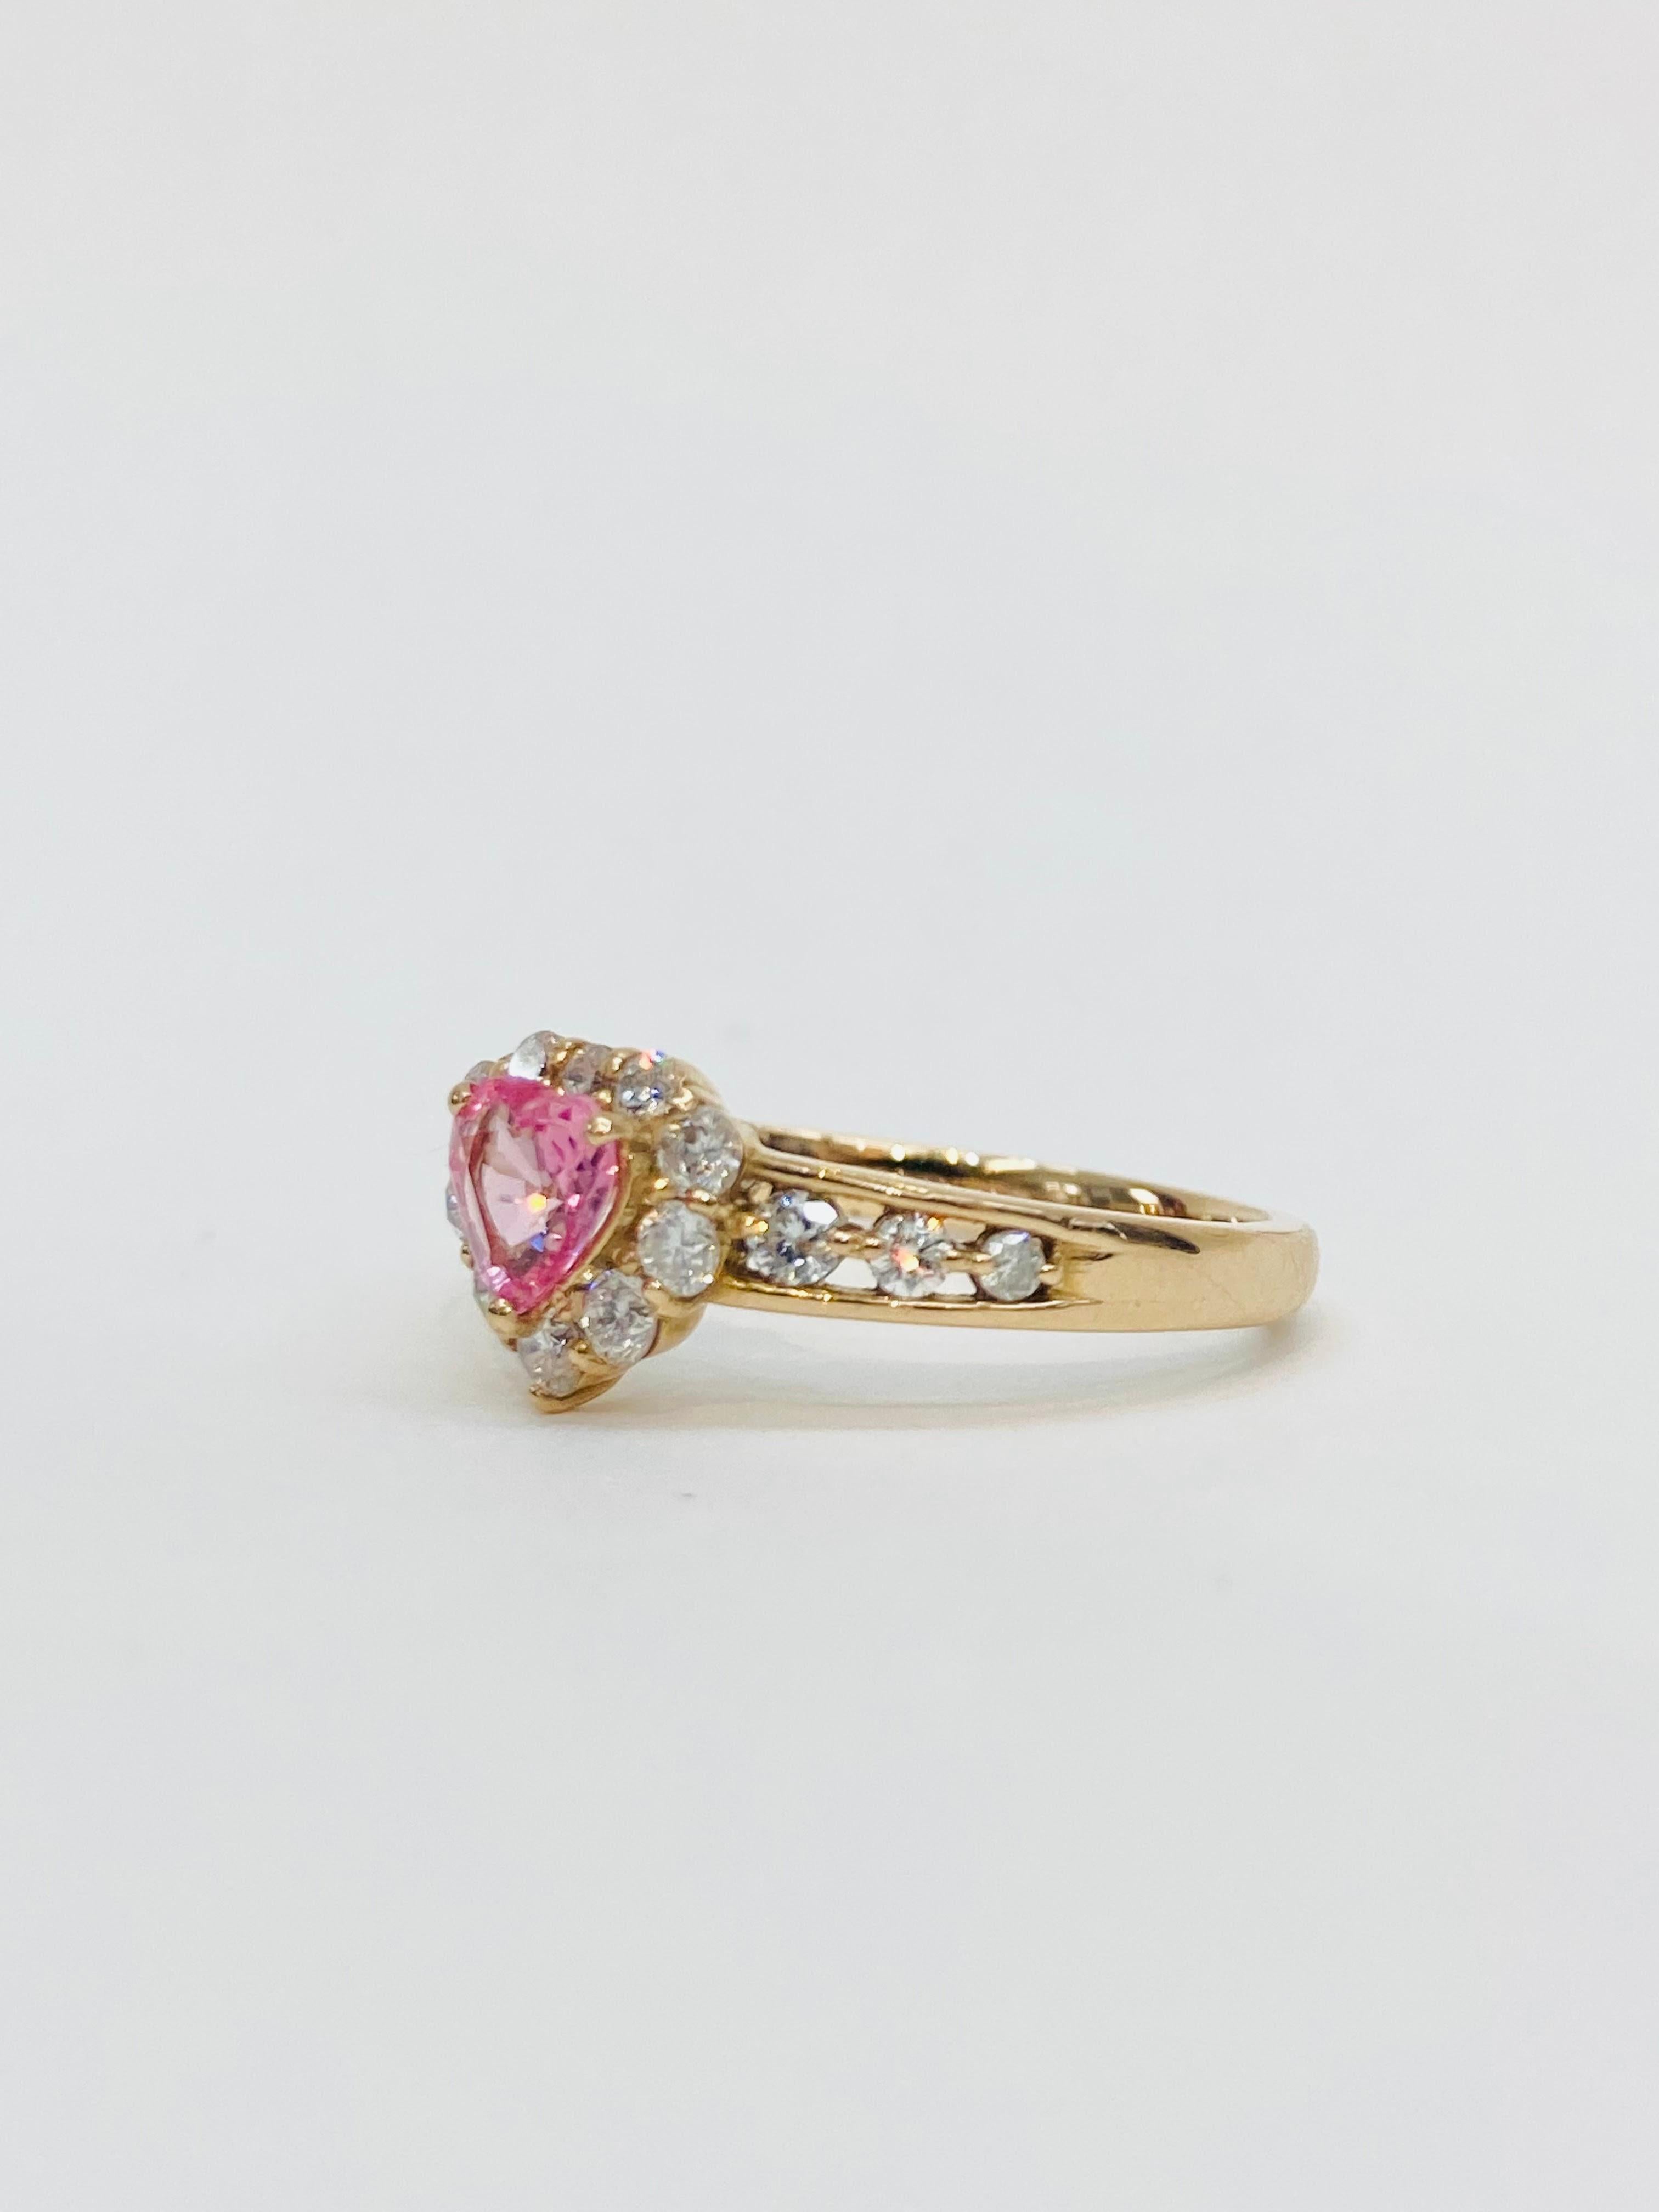 Bochic “Padparadscha” Pink Sapphire & Diamond Cluster 18K Gold Ring  For Sale 4